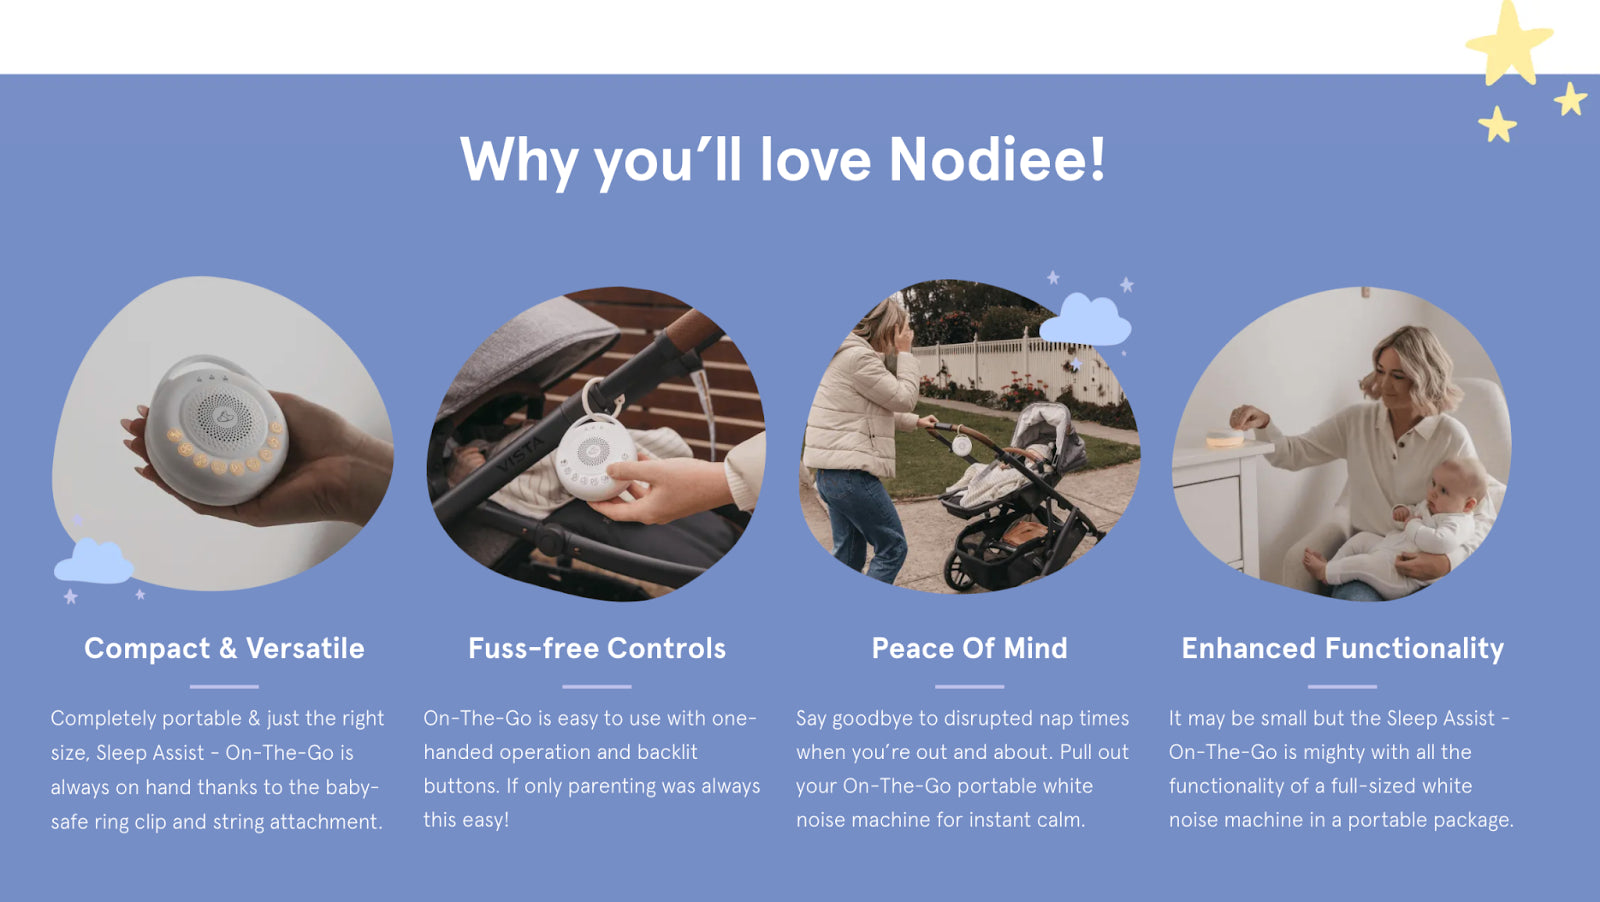 Nodiee’s product page created with GemPages